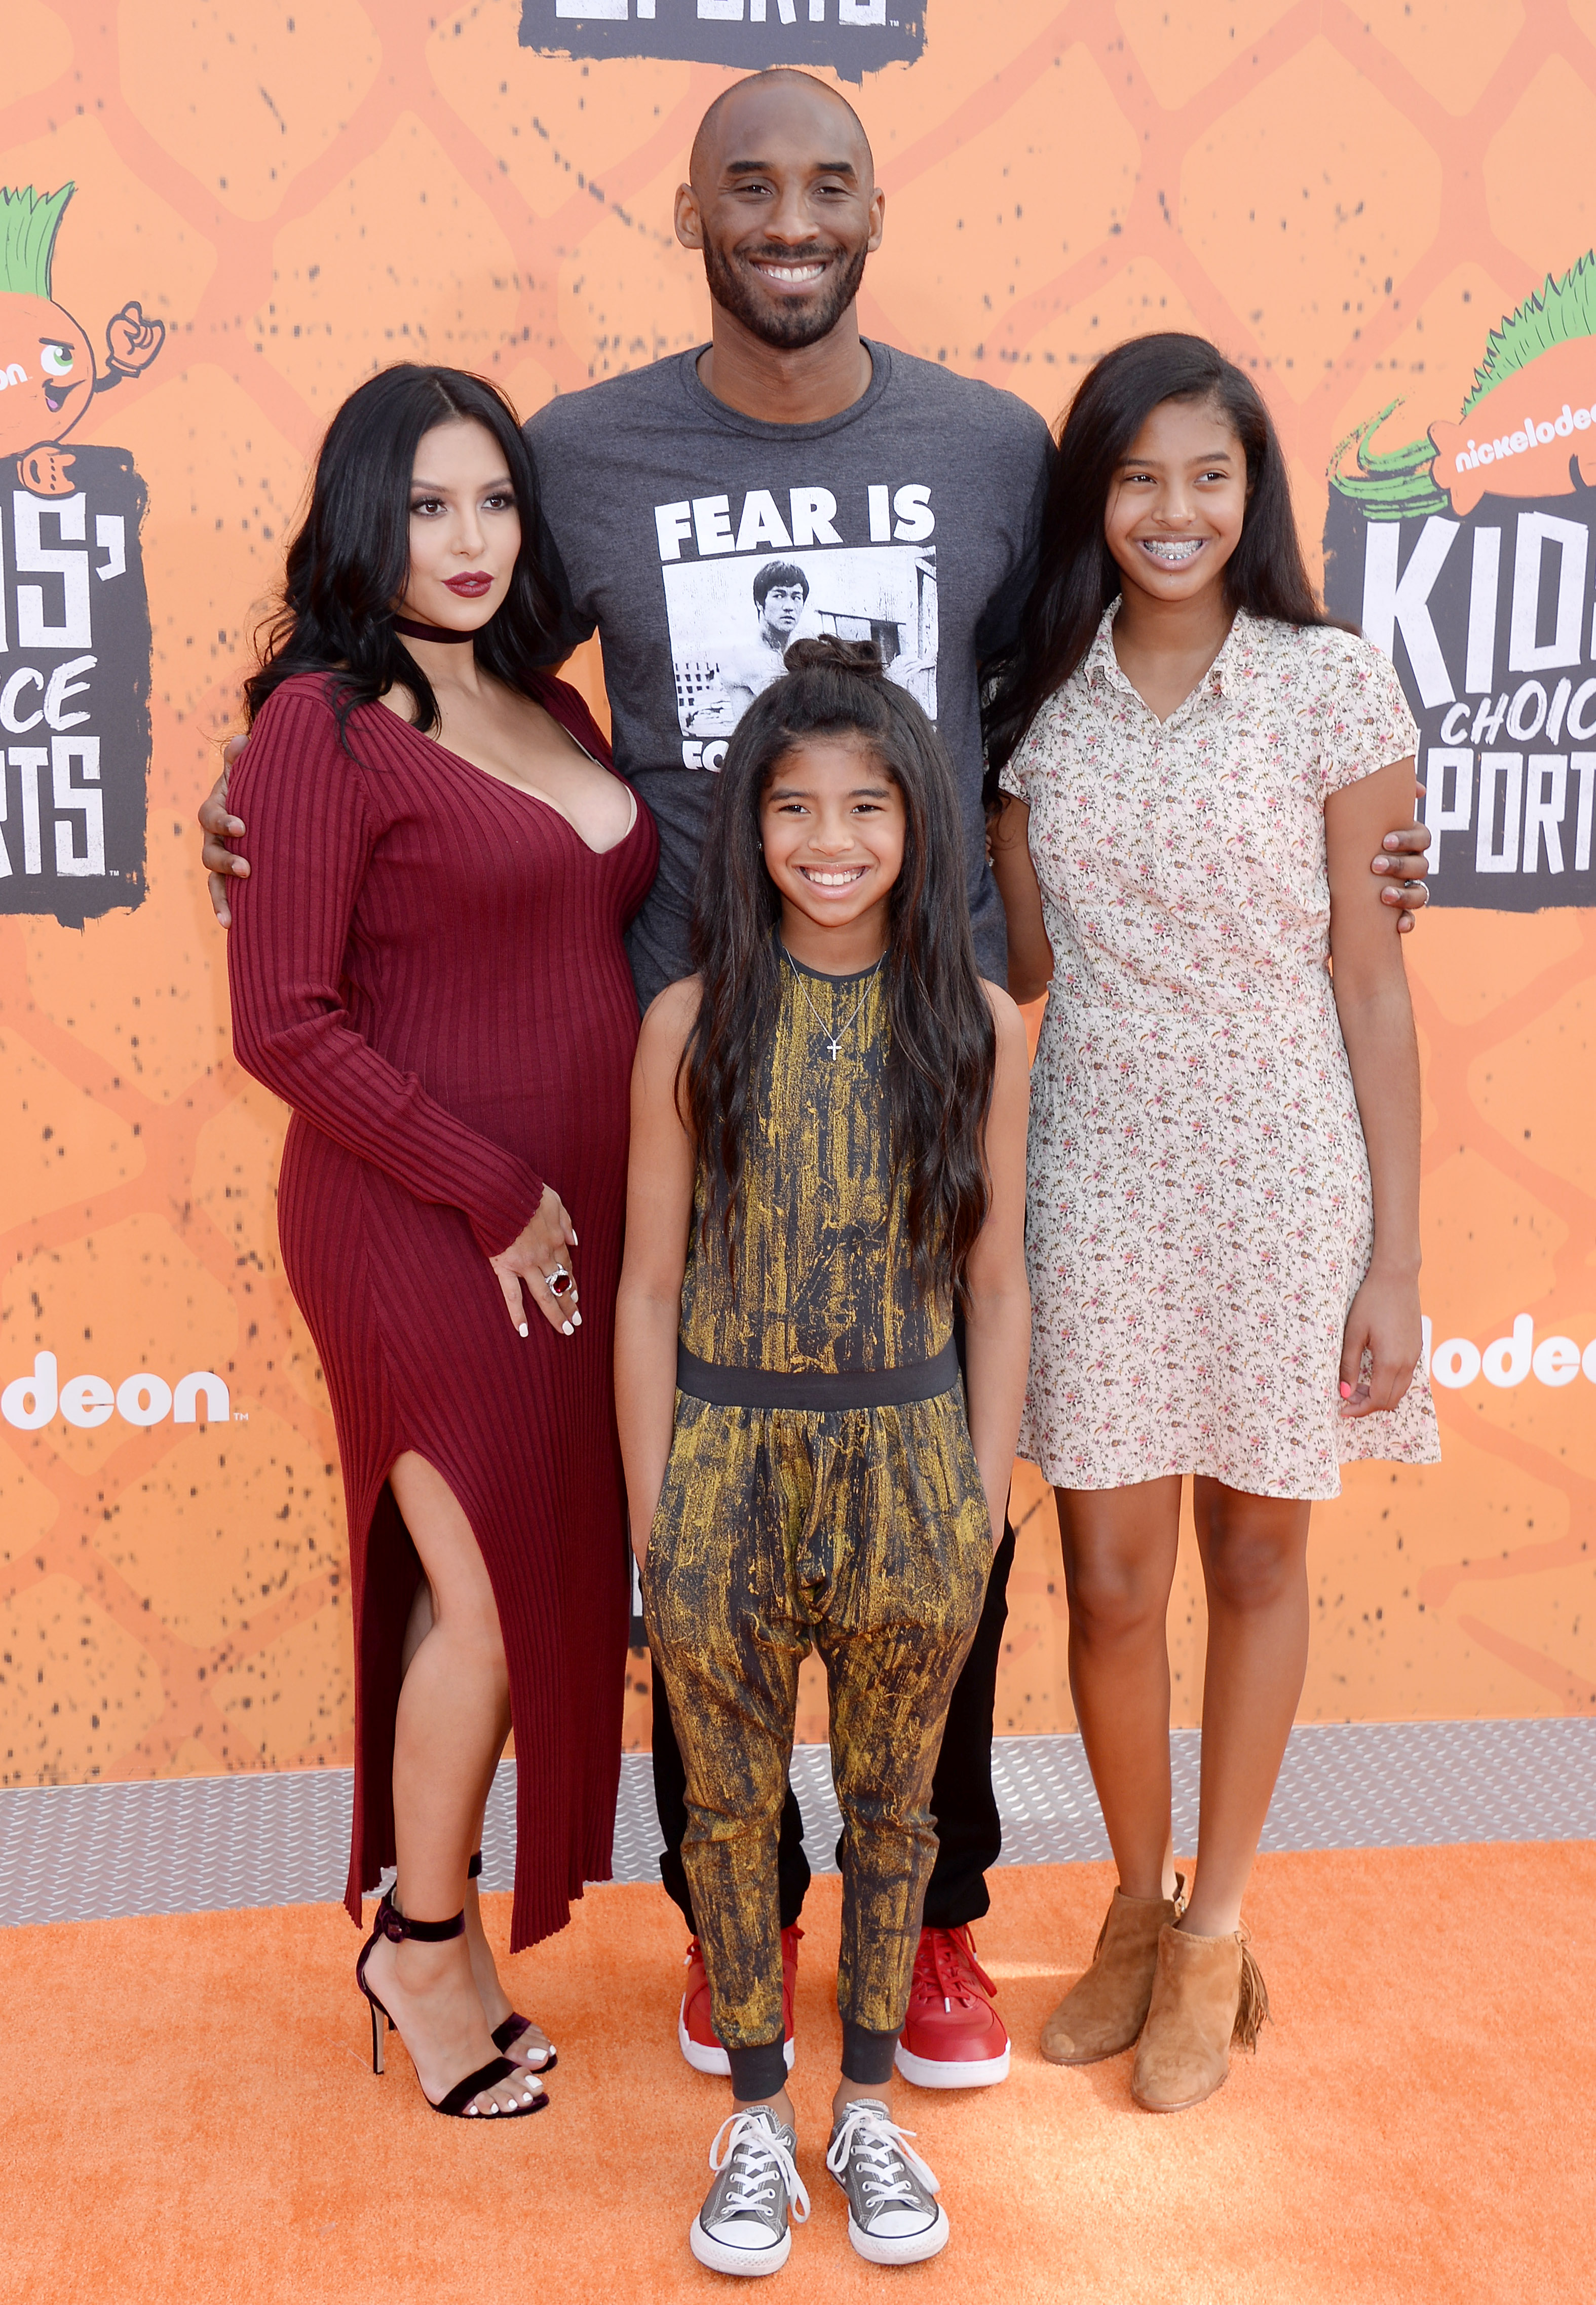 Who Are Kobe Bryant's Wife and Kids? He 